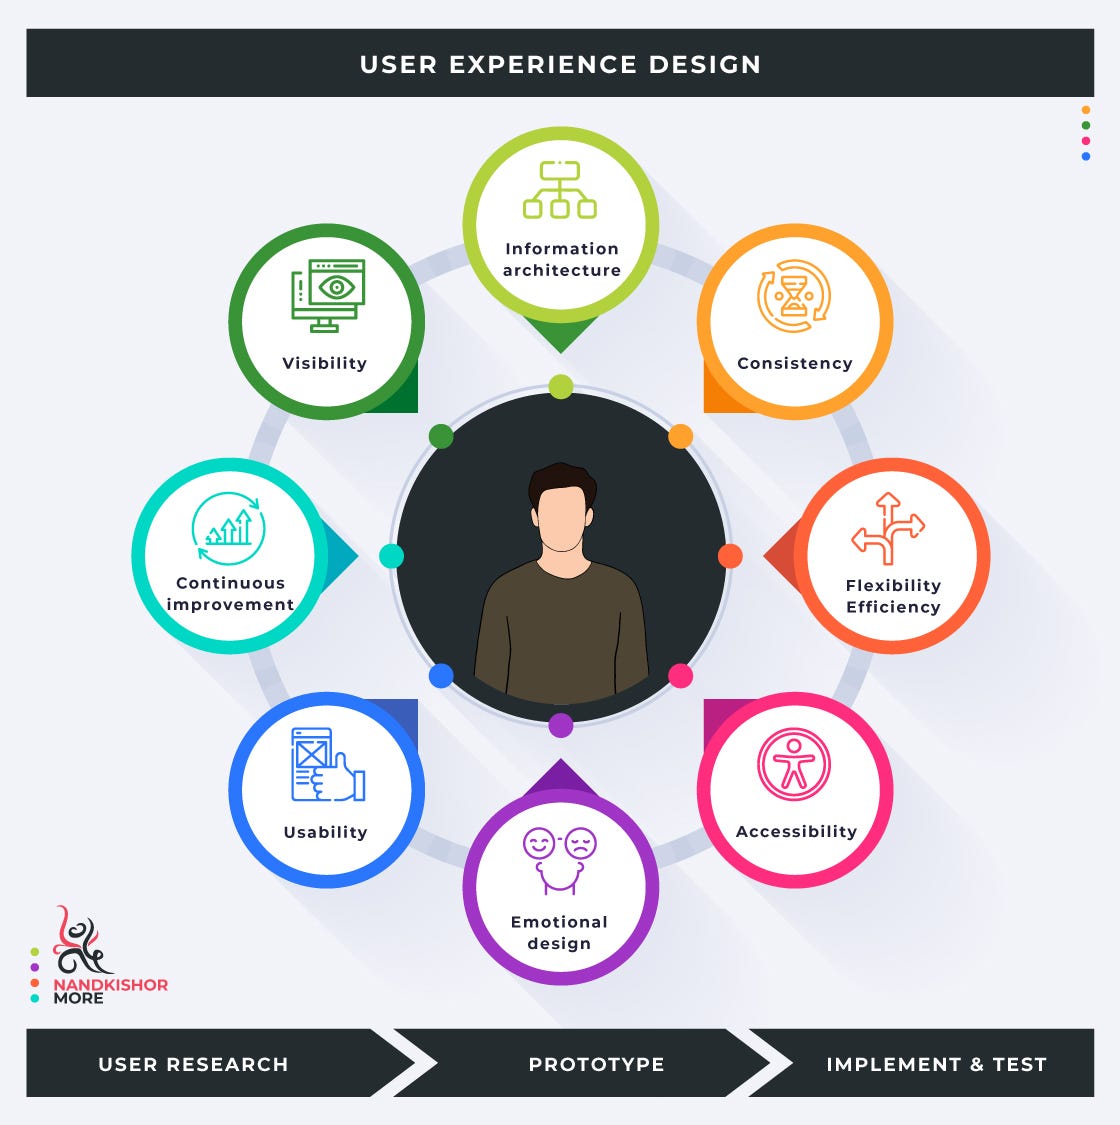 What is User Experience (UX) design?, by Nandkishor More